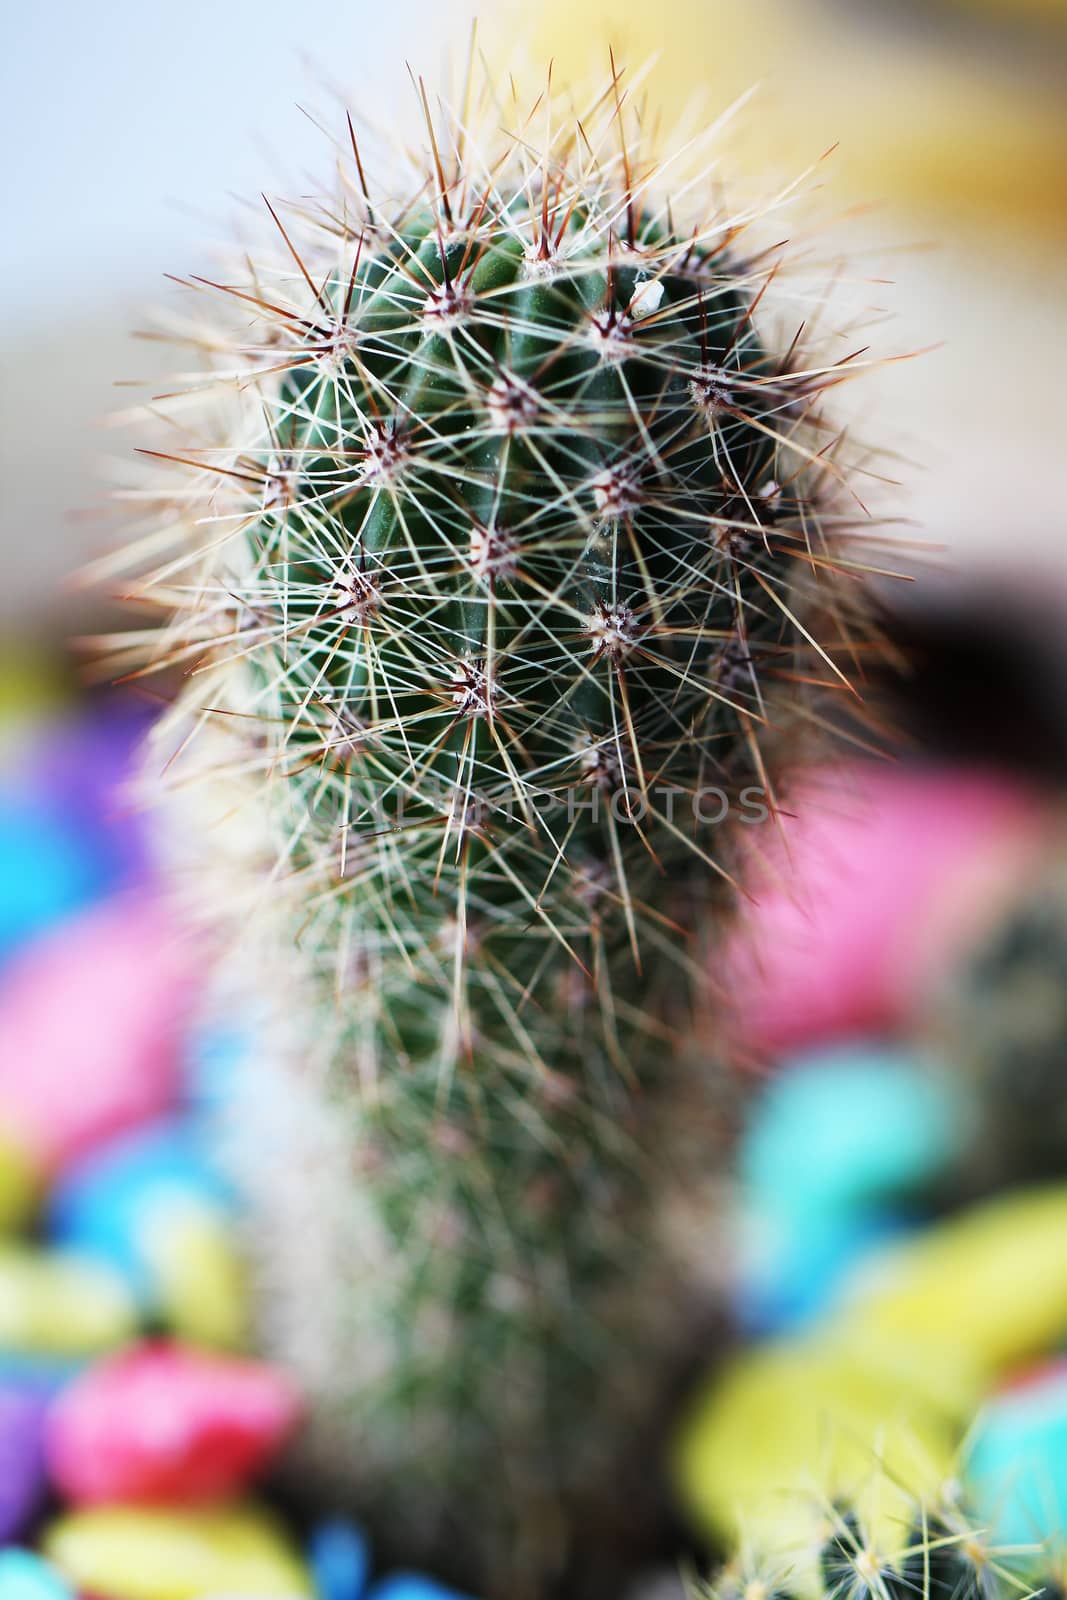 Cactus green plant close up by Voinakh